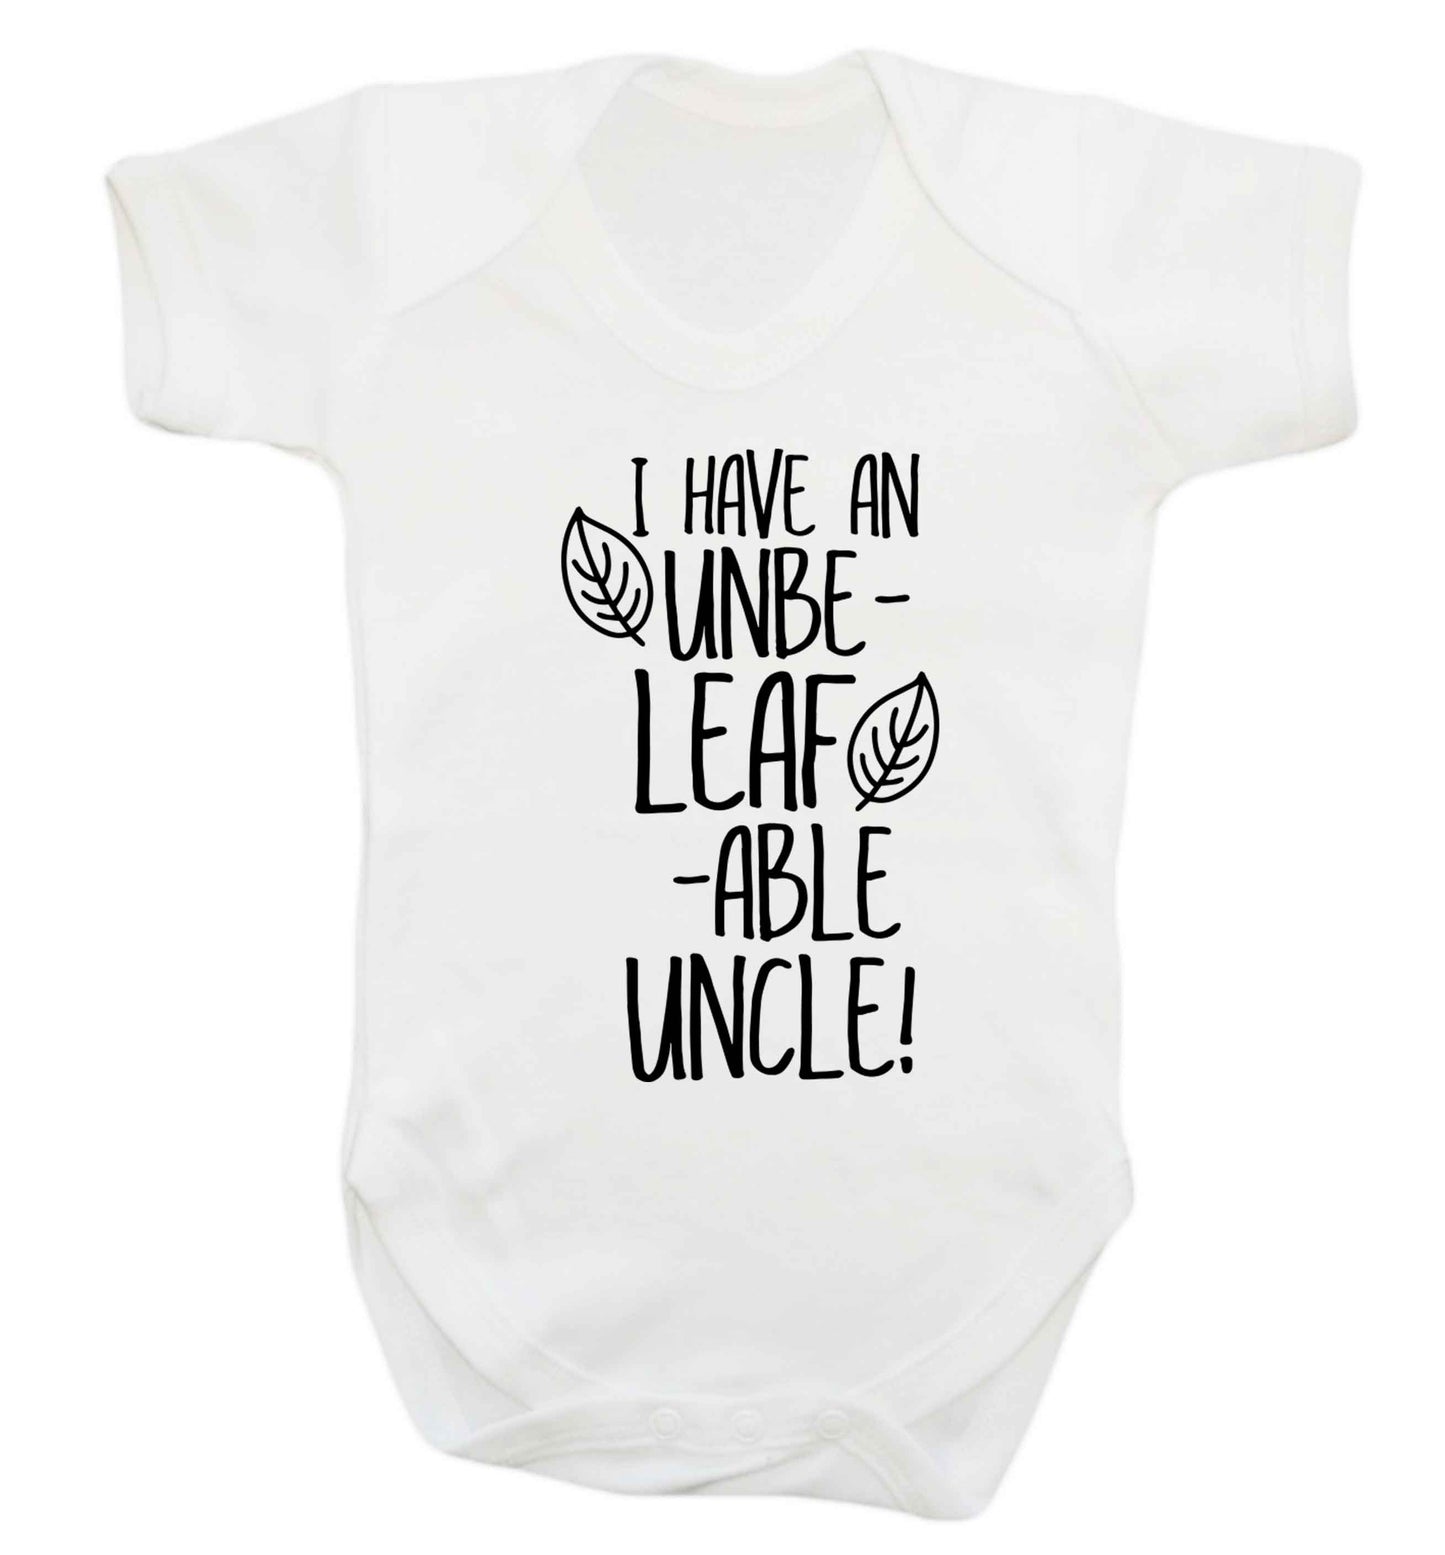 I have an unbe-leaf-able uncle Baby Vest white 18-24 months